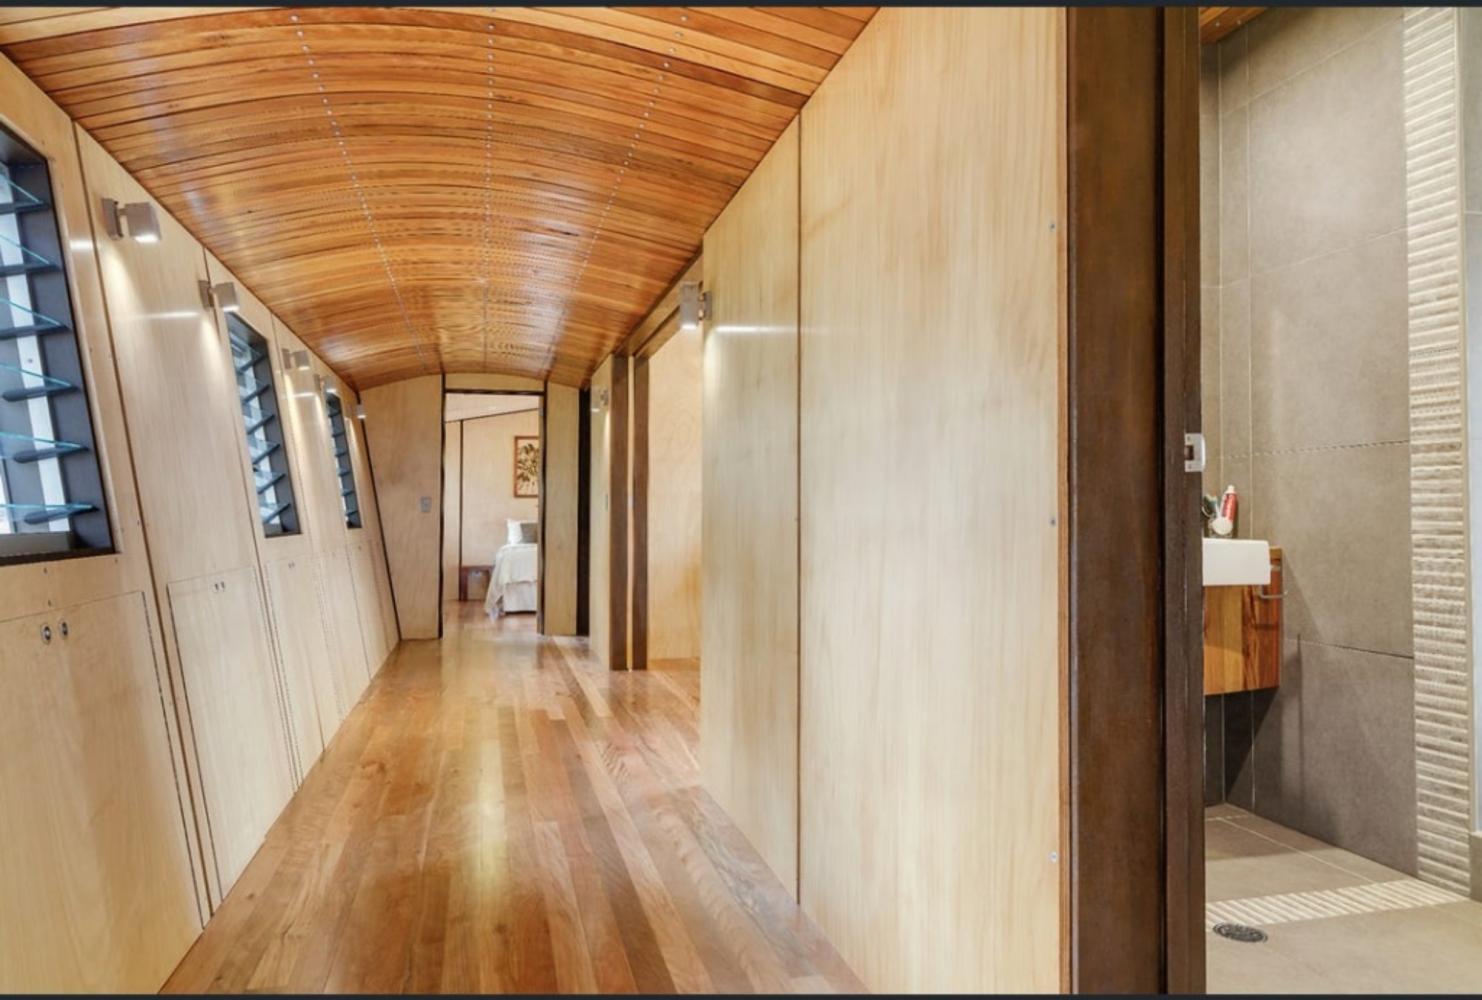 architecturally designed hallway leading to main bathroom, bedrooms 2 and 3, and laundry